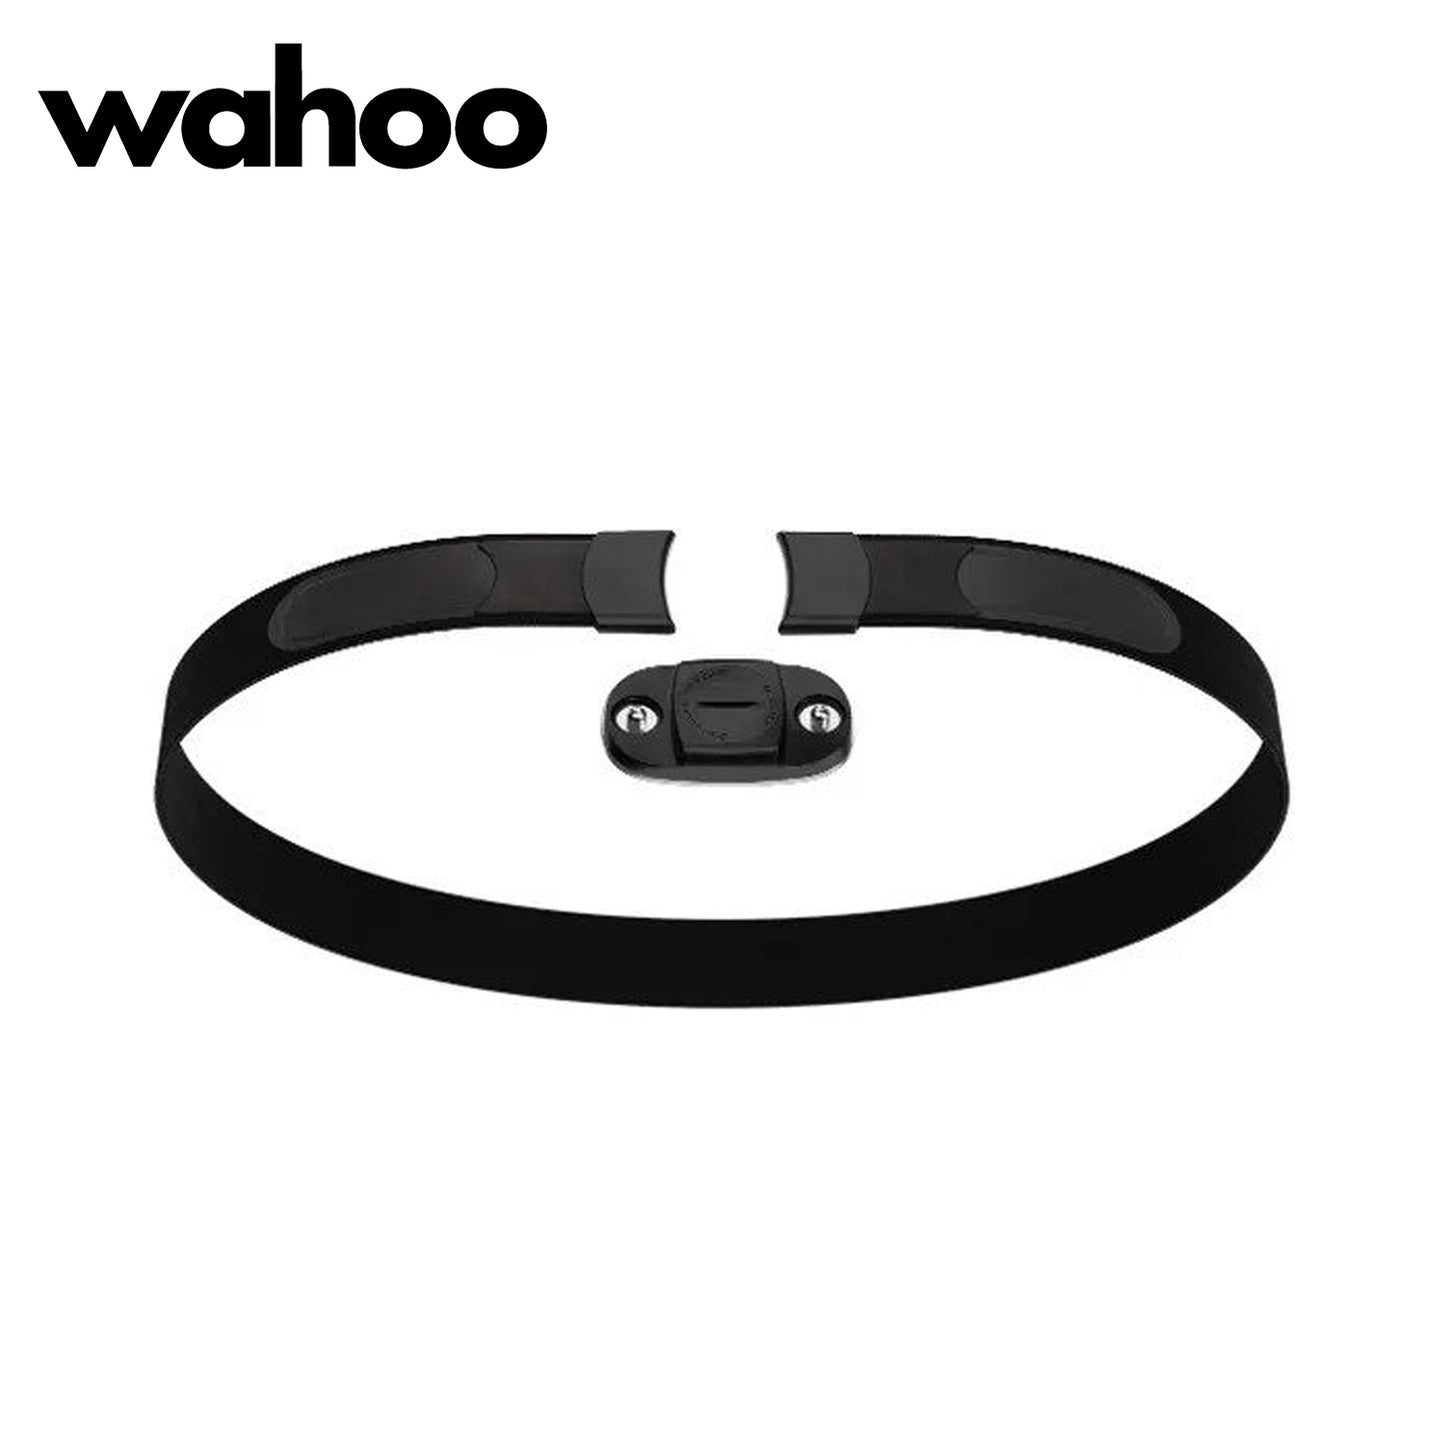 Wahoo TICKR Heart Rate Monitor w/ Chest Strap - Stealth Gray